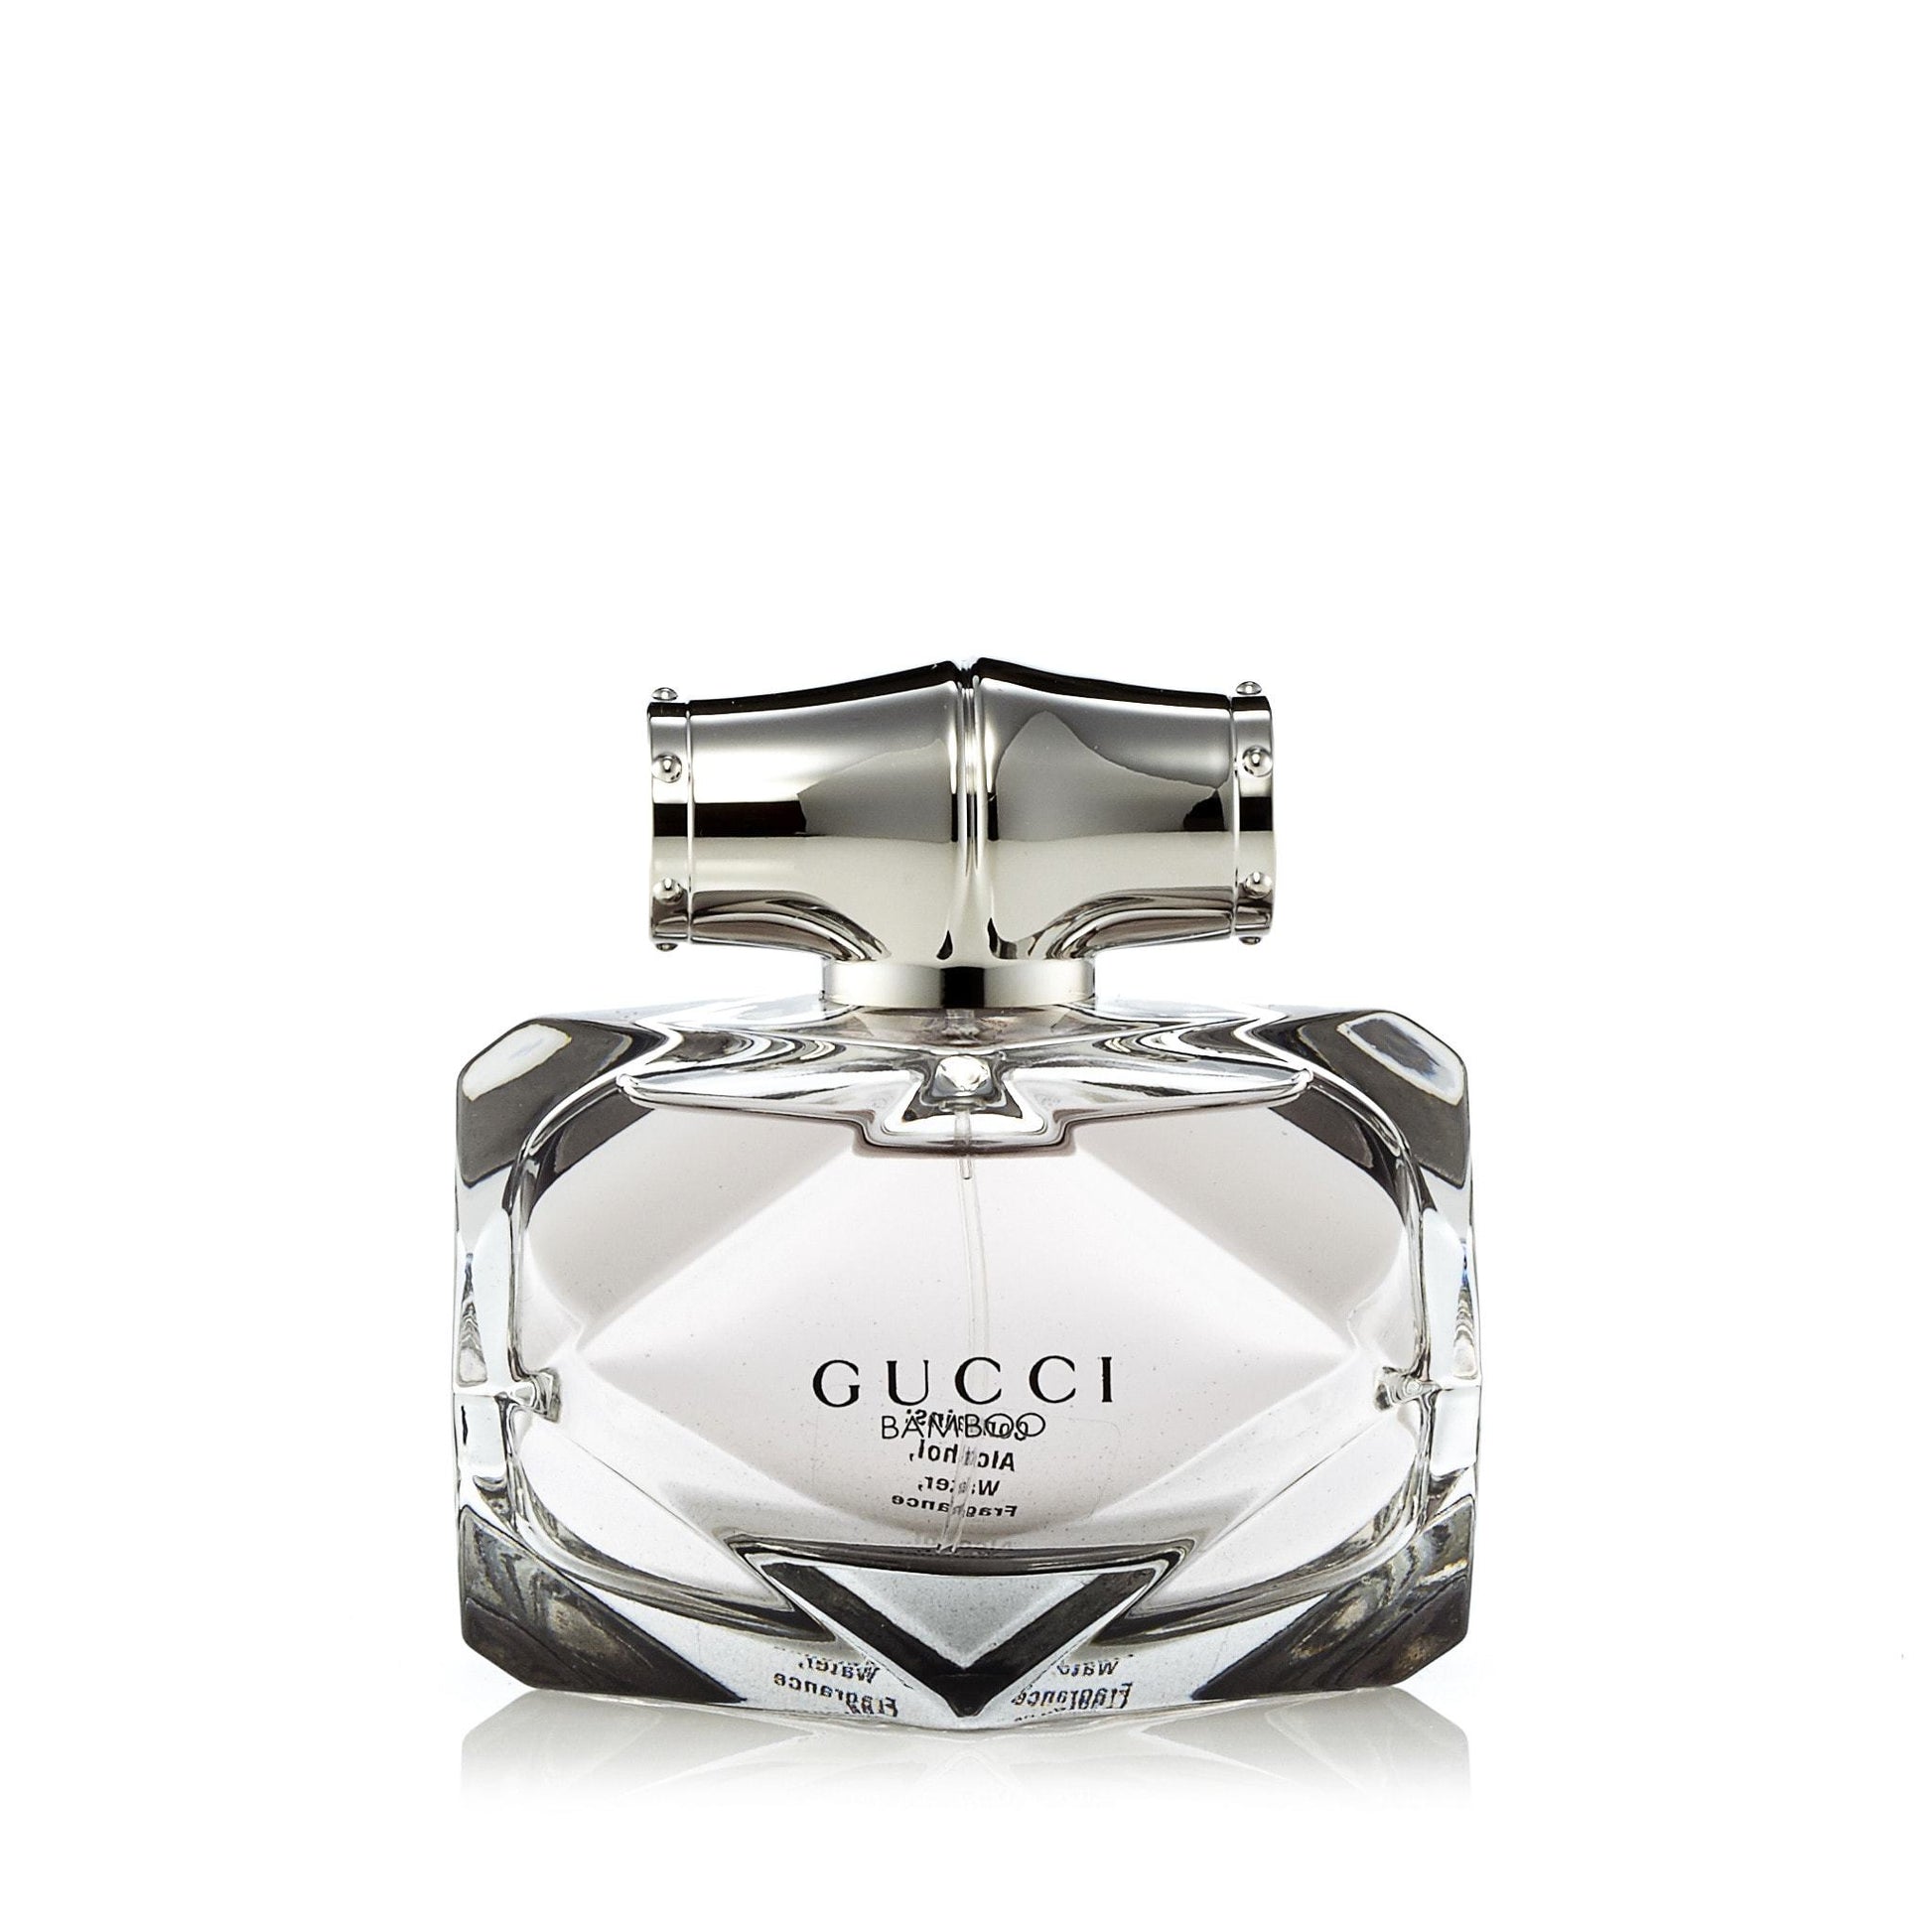 Bamboo Eau de Parfum Spray for Women by Gucci, Product image 4